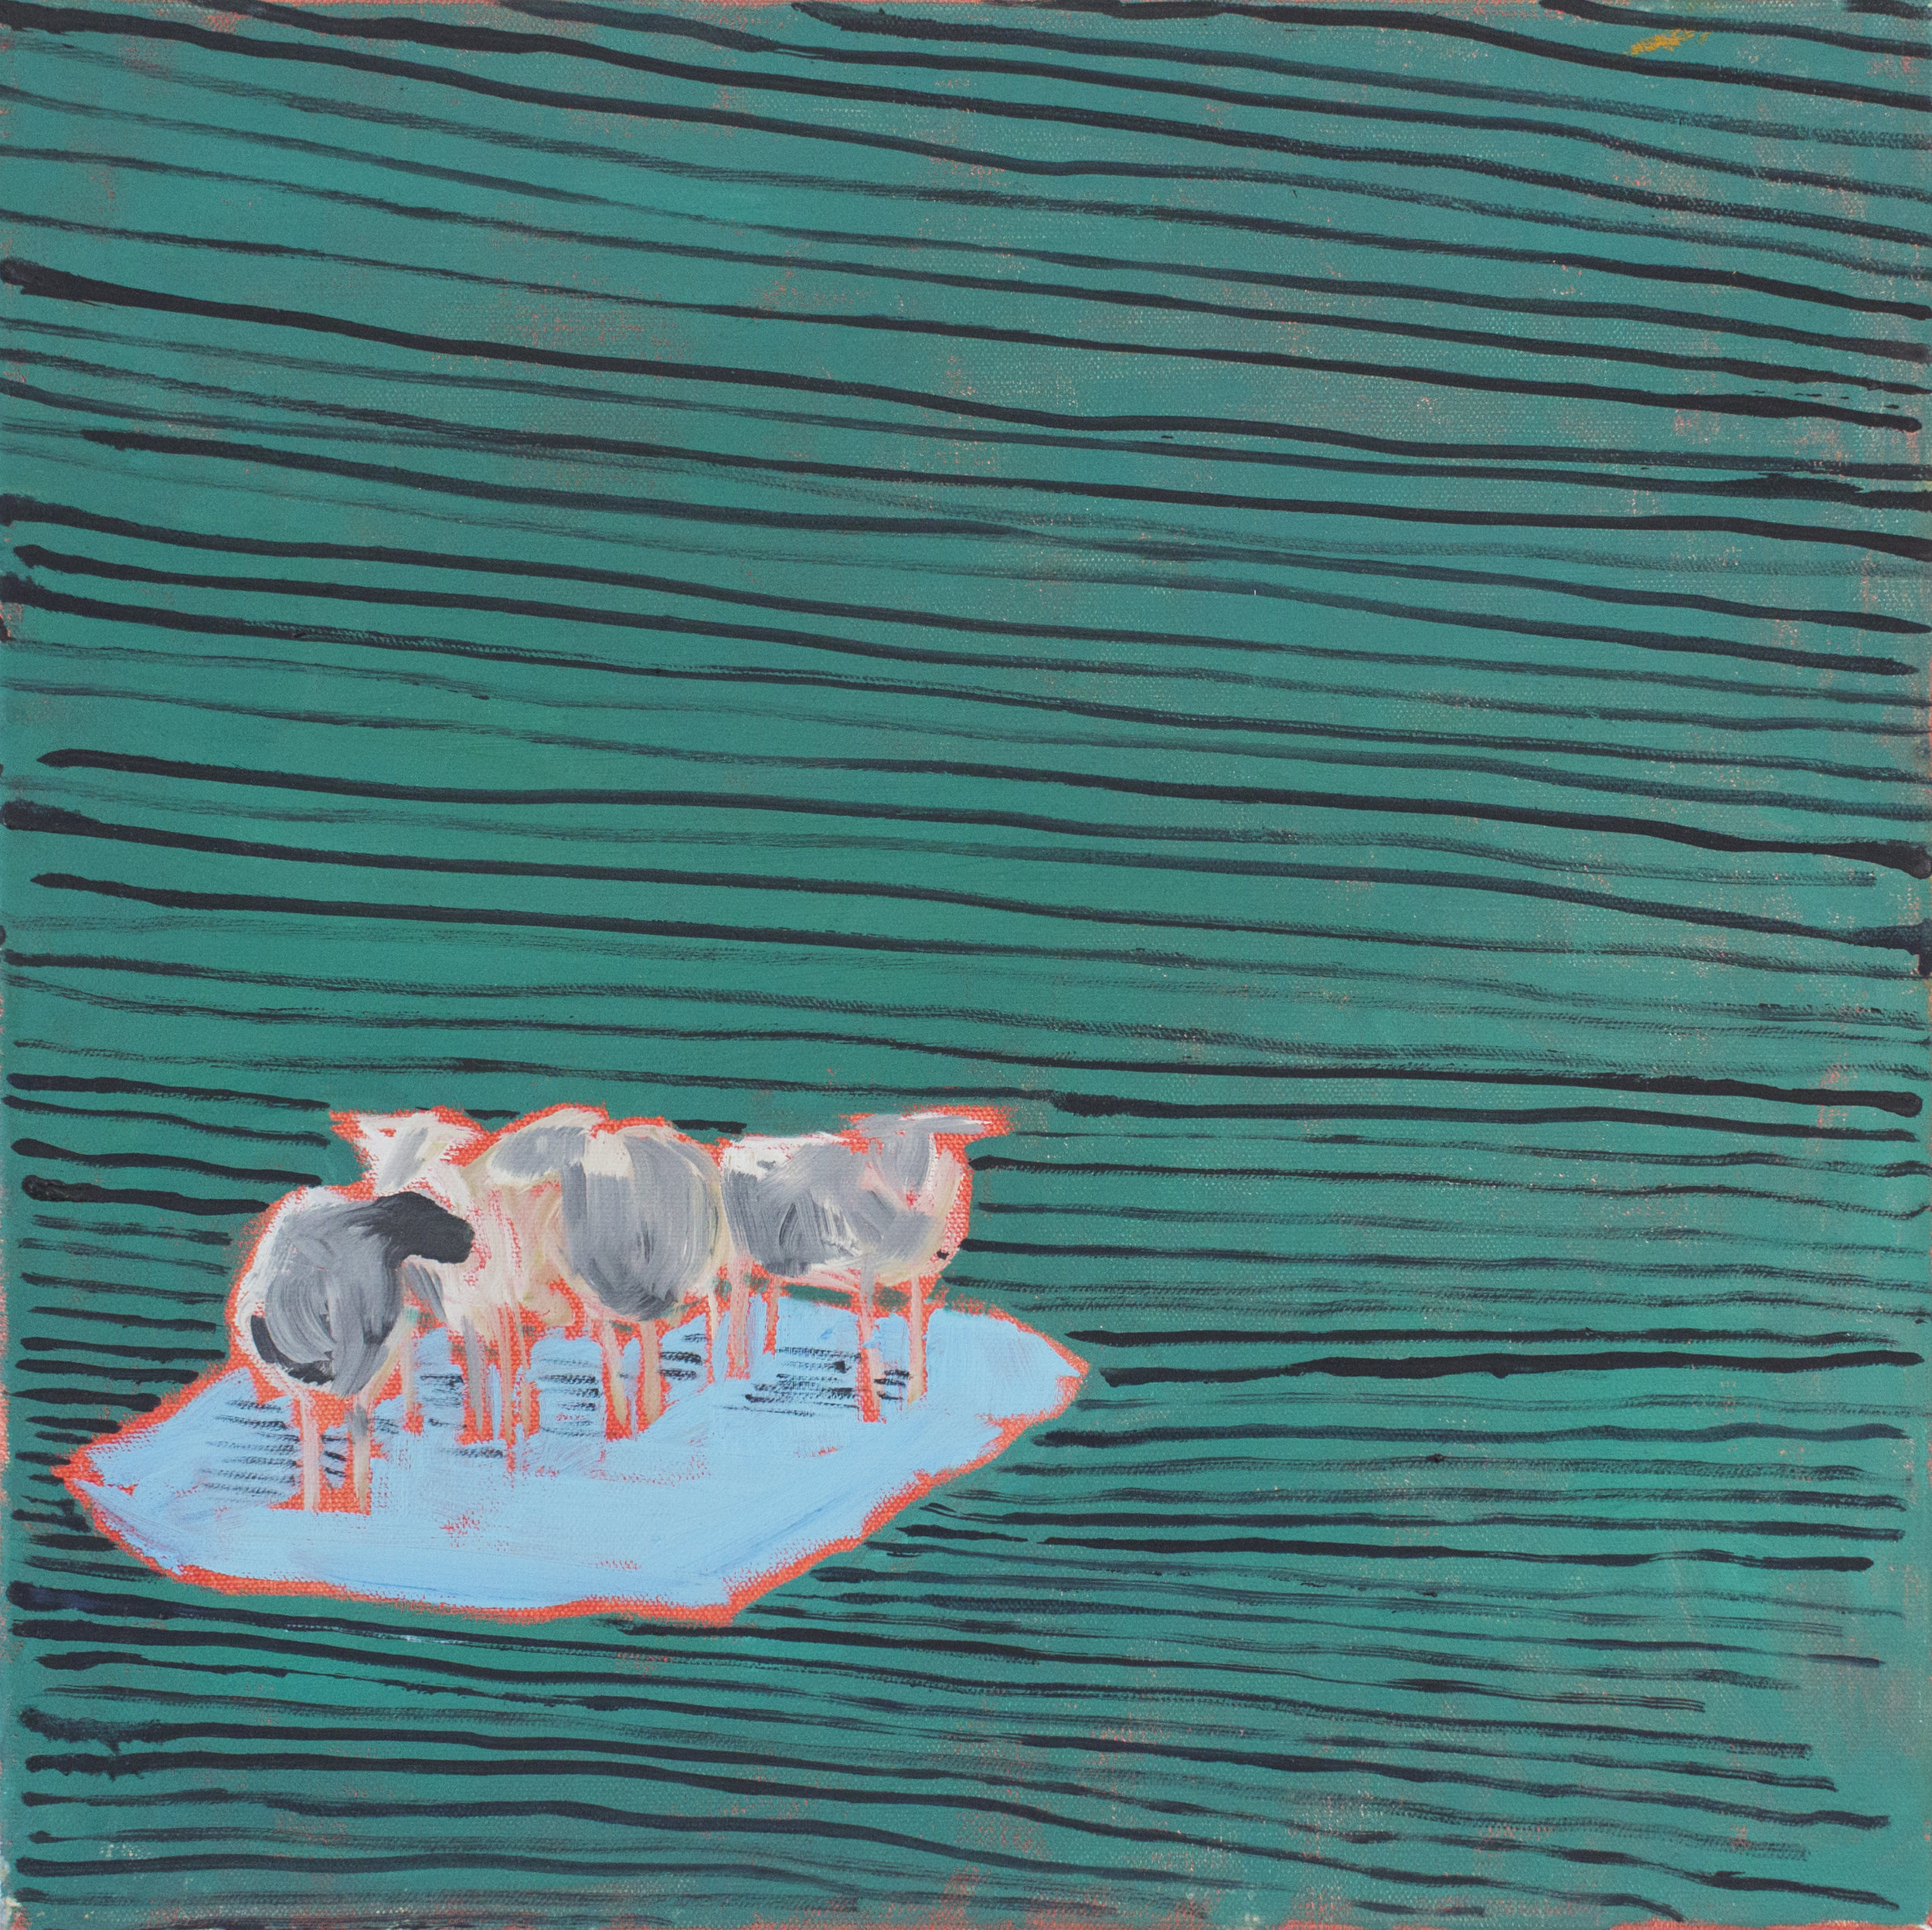  Sheep on Ice, Green Stripes  2019  oil on canvas  16" x 16" 